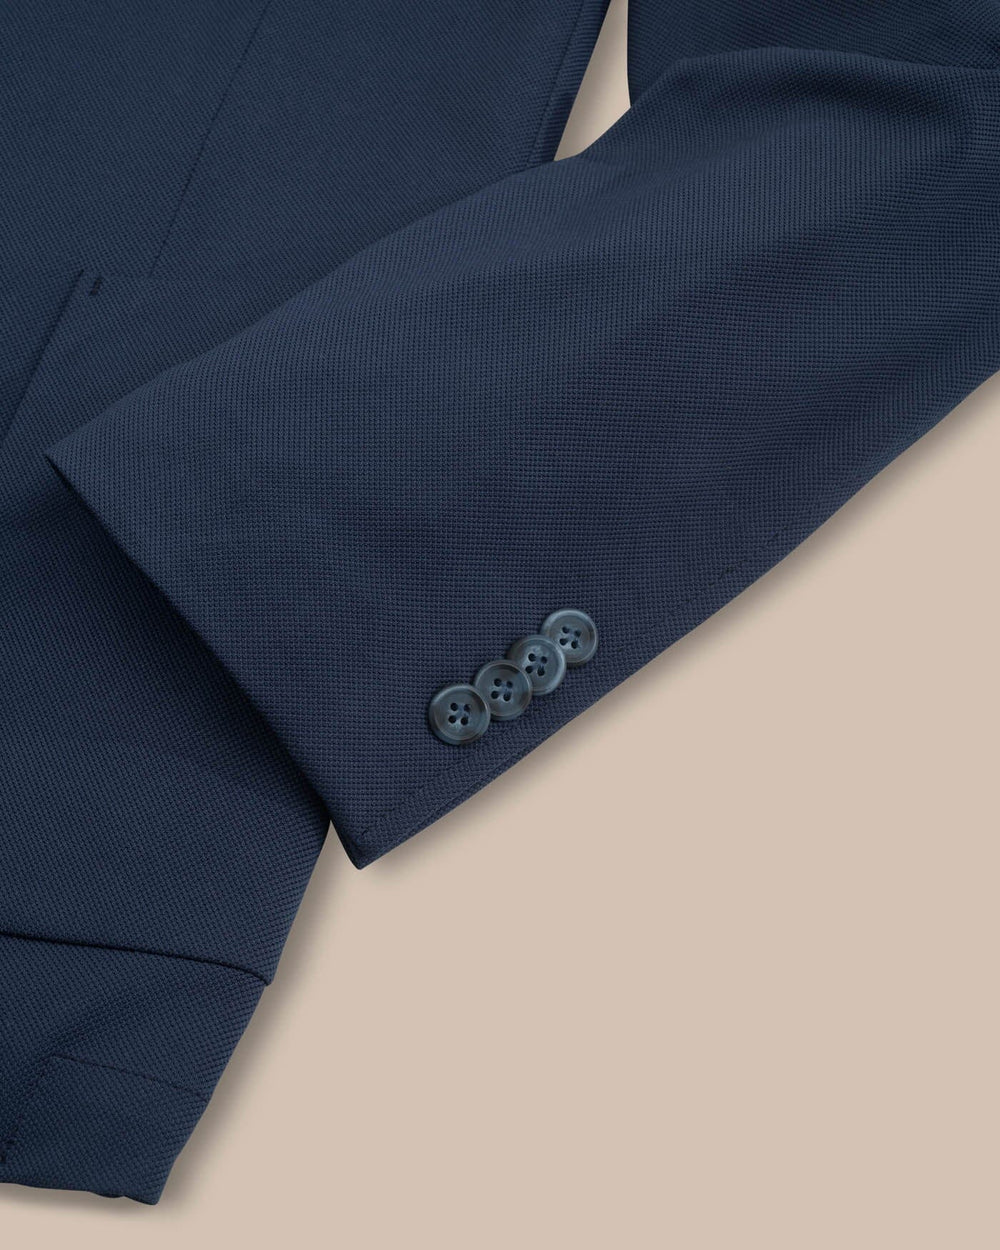 The detail view of the Southern Tide Charleston Navy Blazer by Southern Tide - Navy